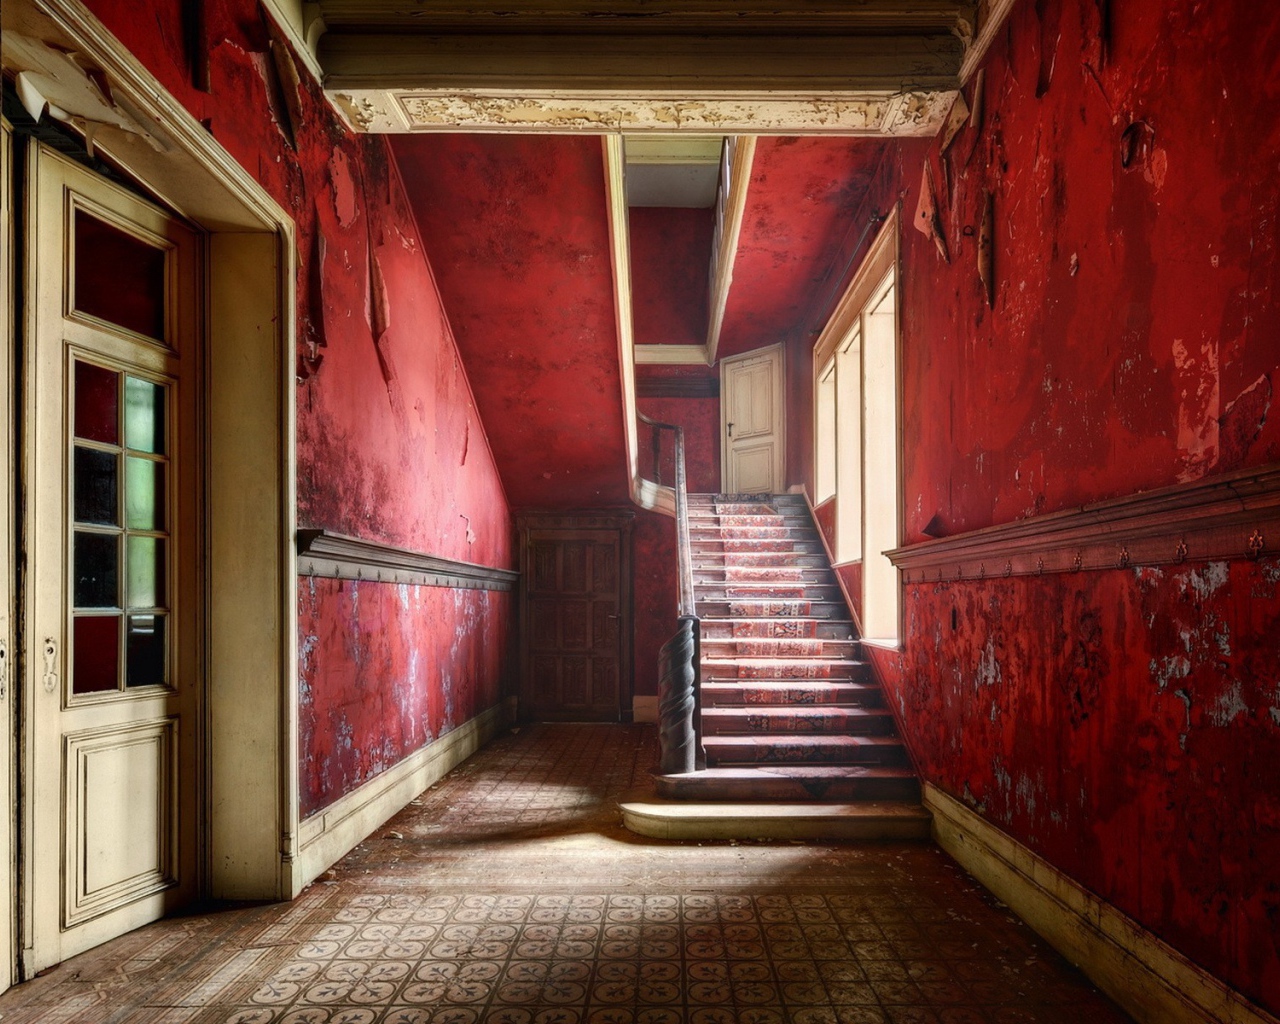 Red walls inside the abandoned house